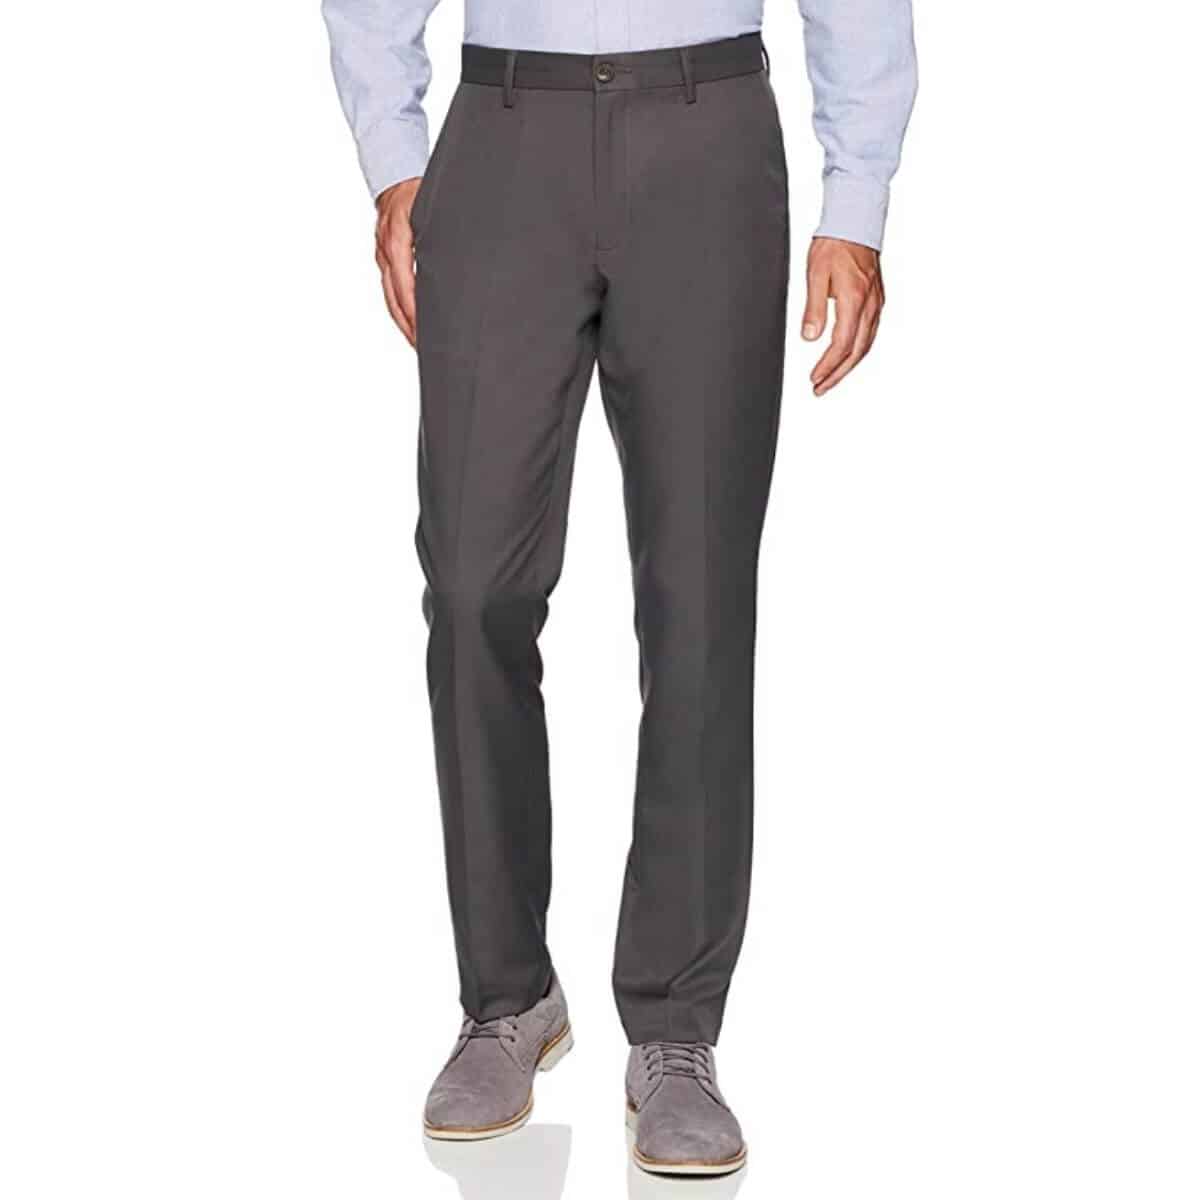 Bottom half of a person wearing dress pants.